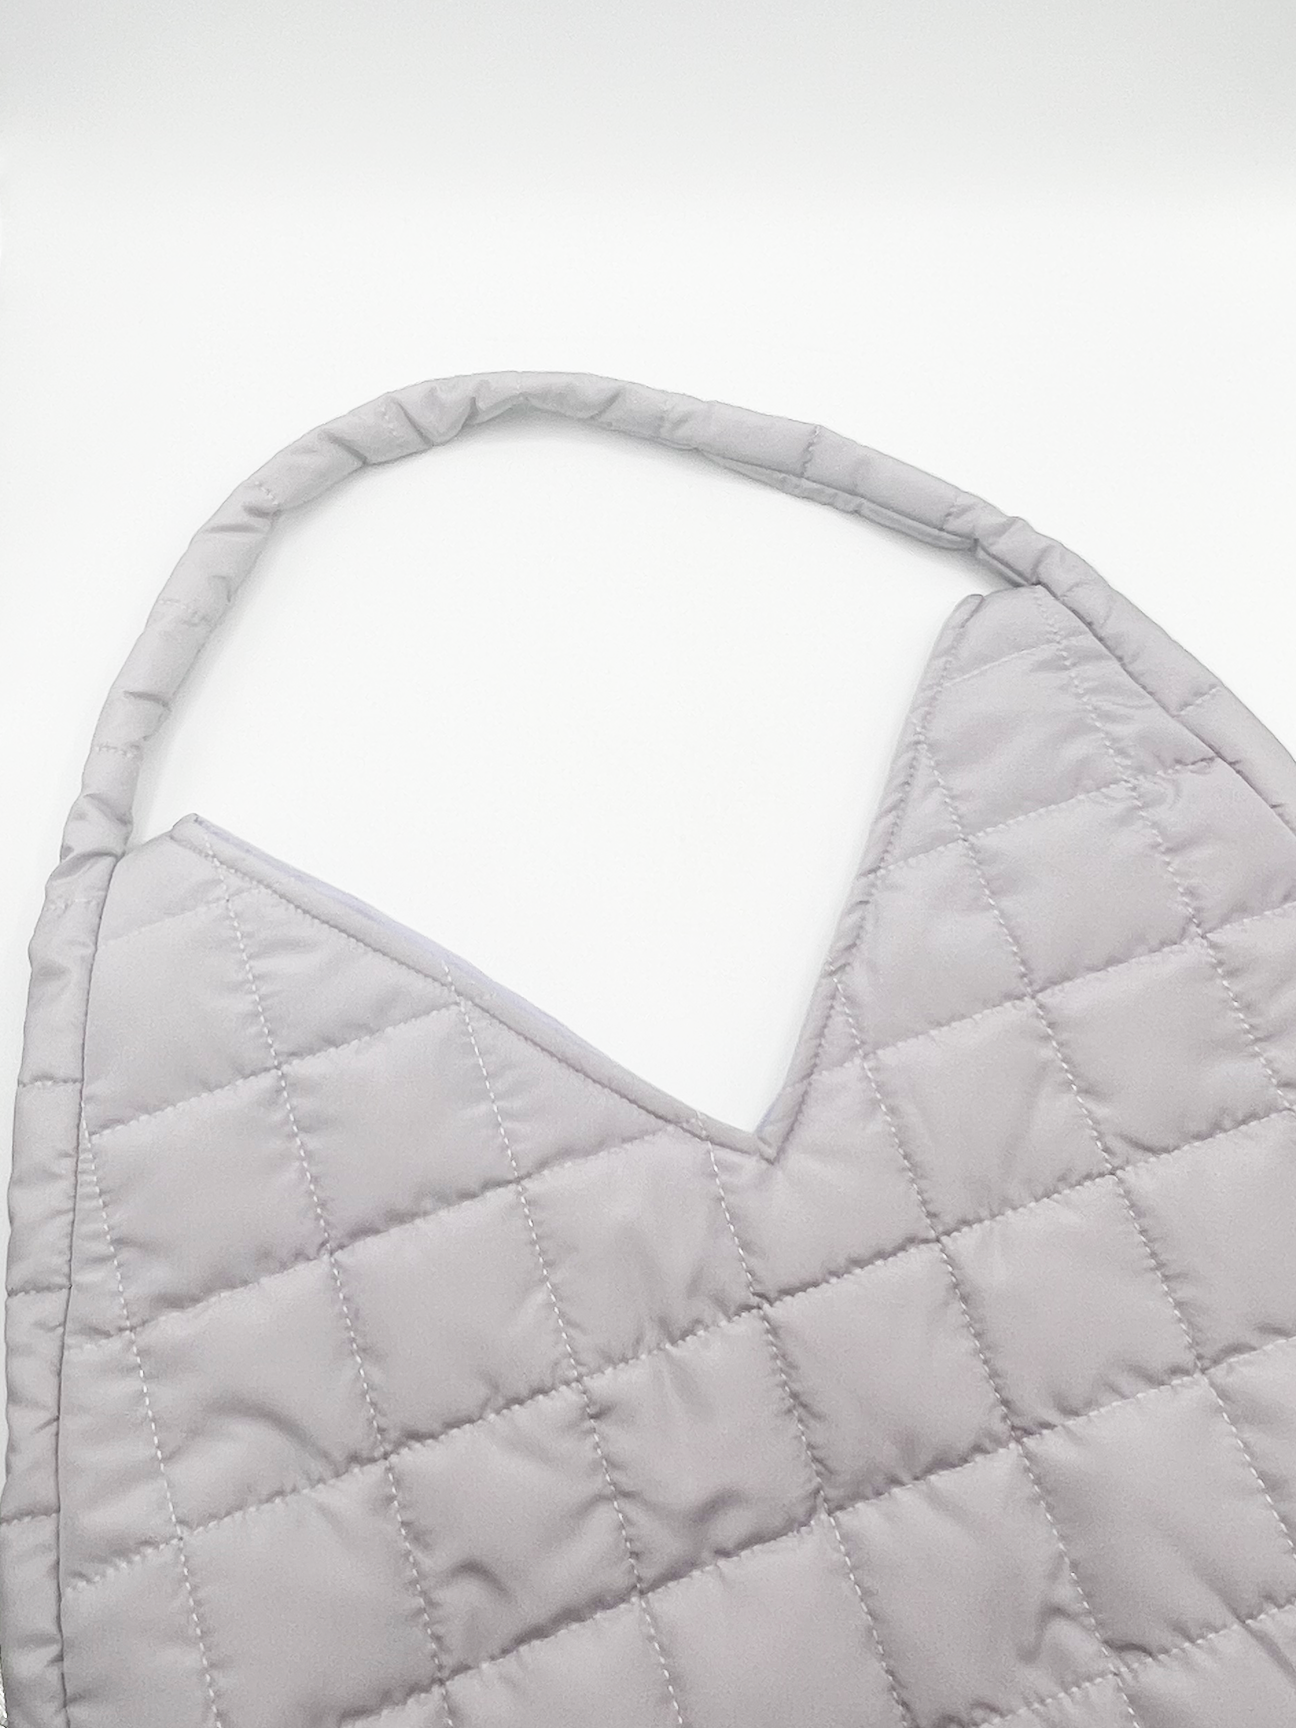 Soft quilted shoulder bag in pearl grey